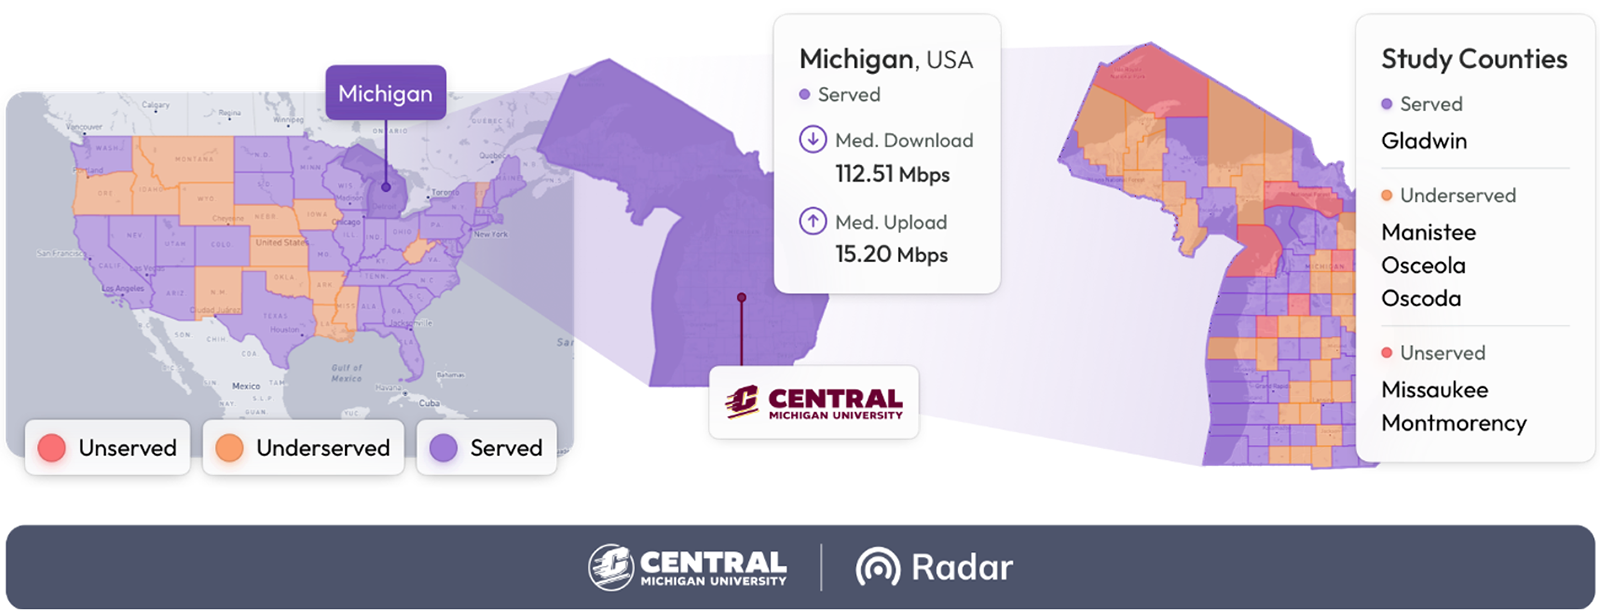 Multicolored map of United States and Michigan with outlines of states and counties. Overlaying text shows location of CMU and Internet speed data from various counties. At the bottom are the CMU and Radar logos.